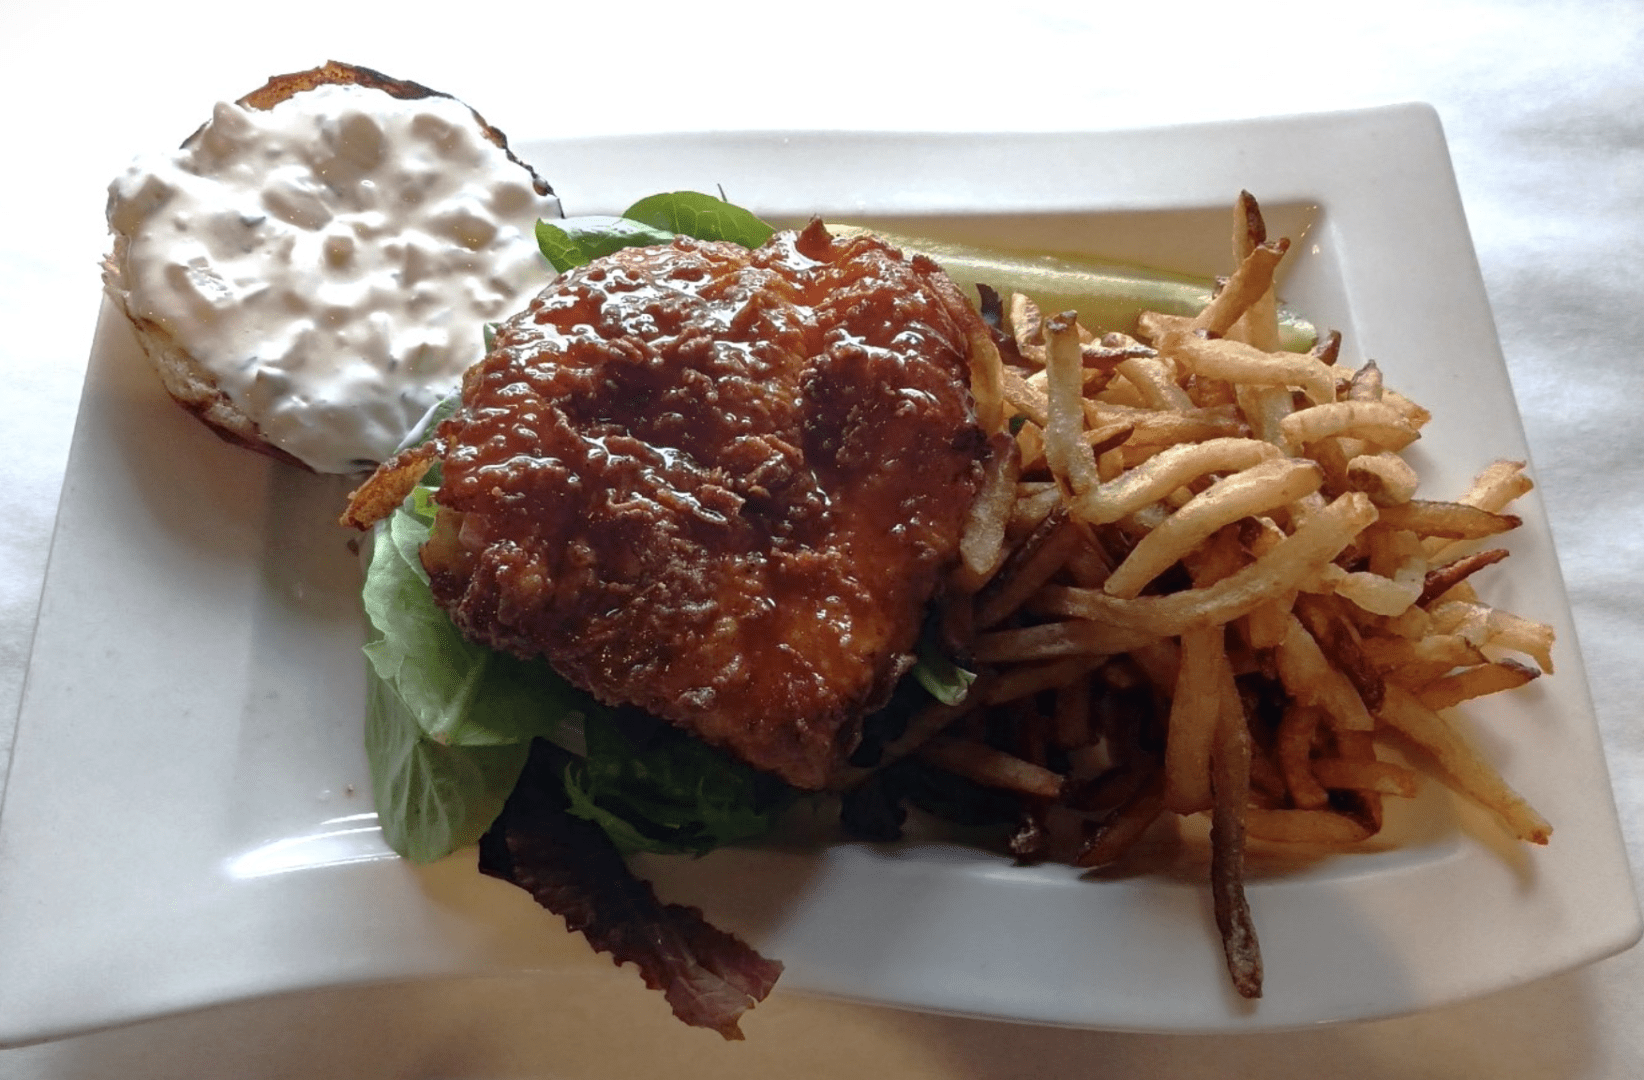 A delicious chicken burger and a side of crispy french fries served on a white plate.